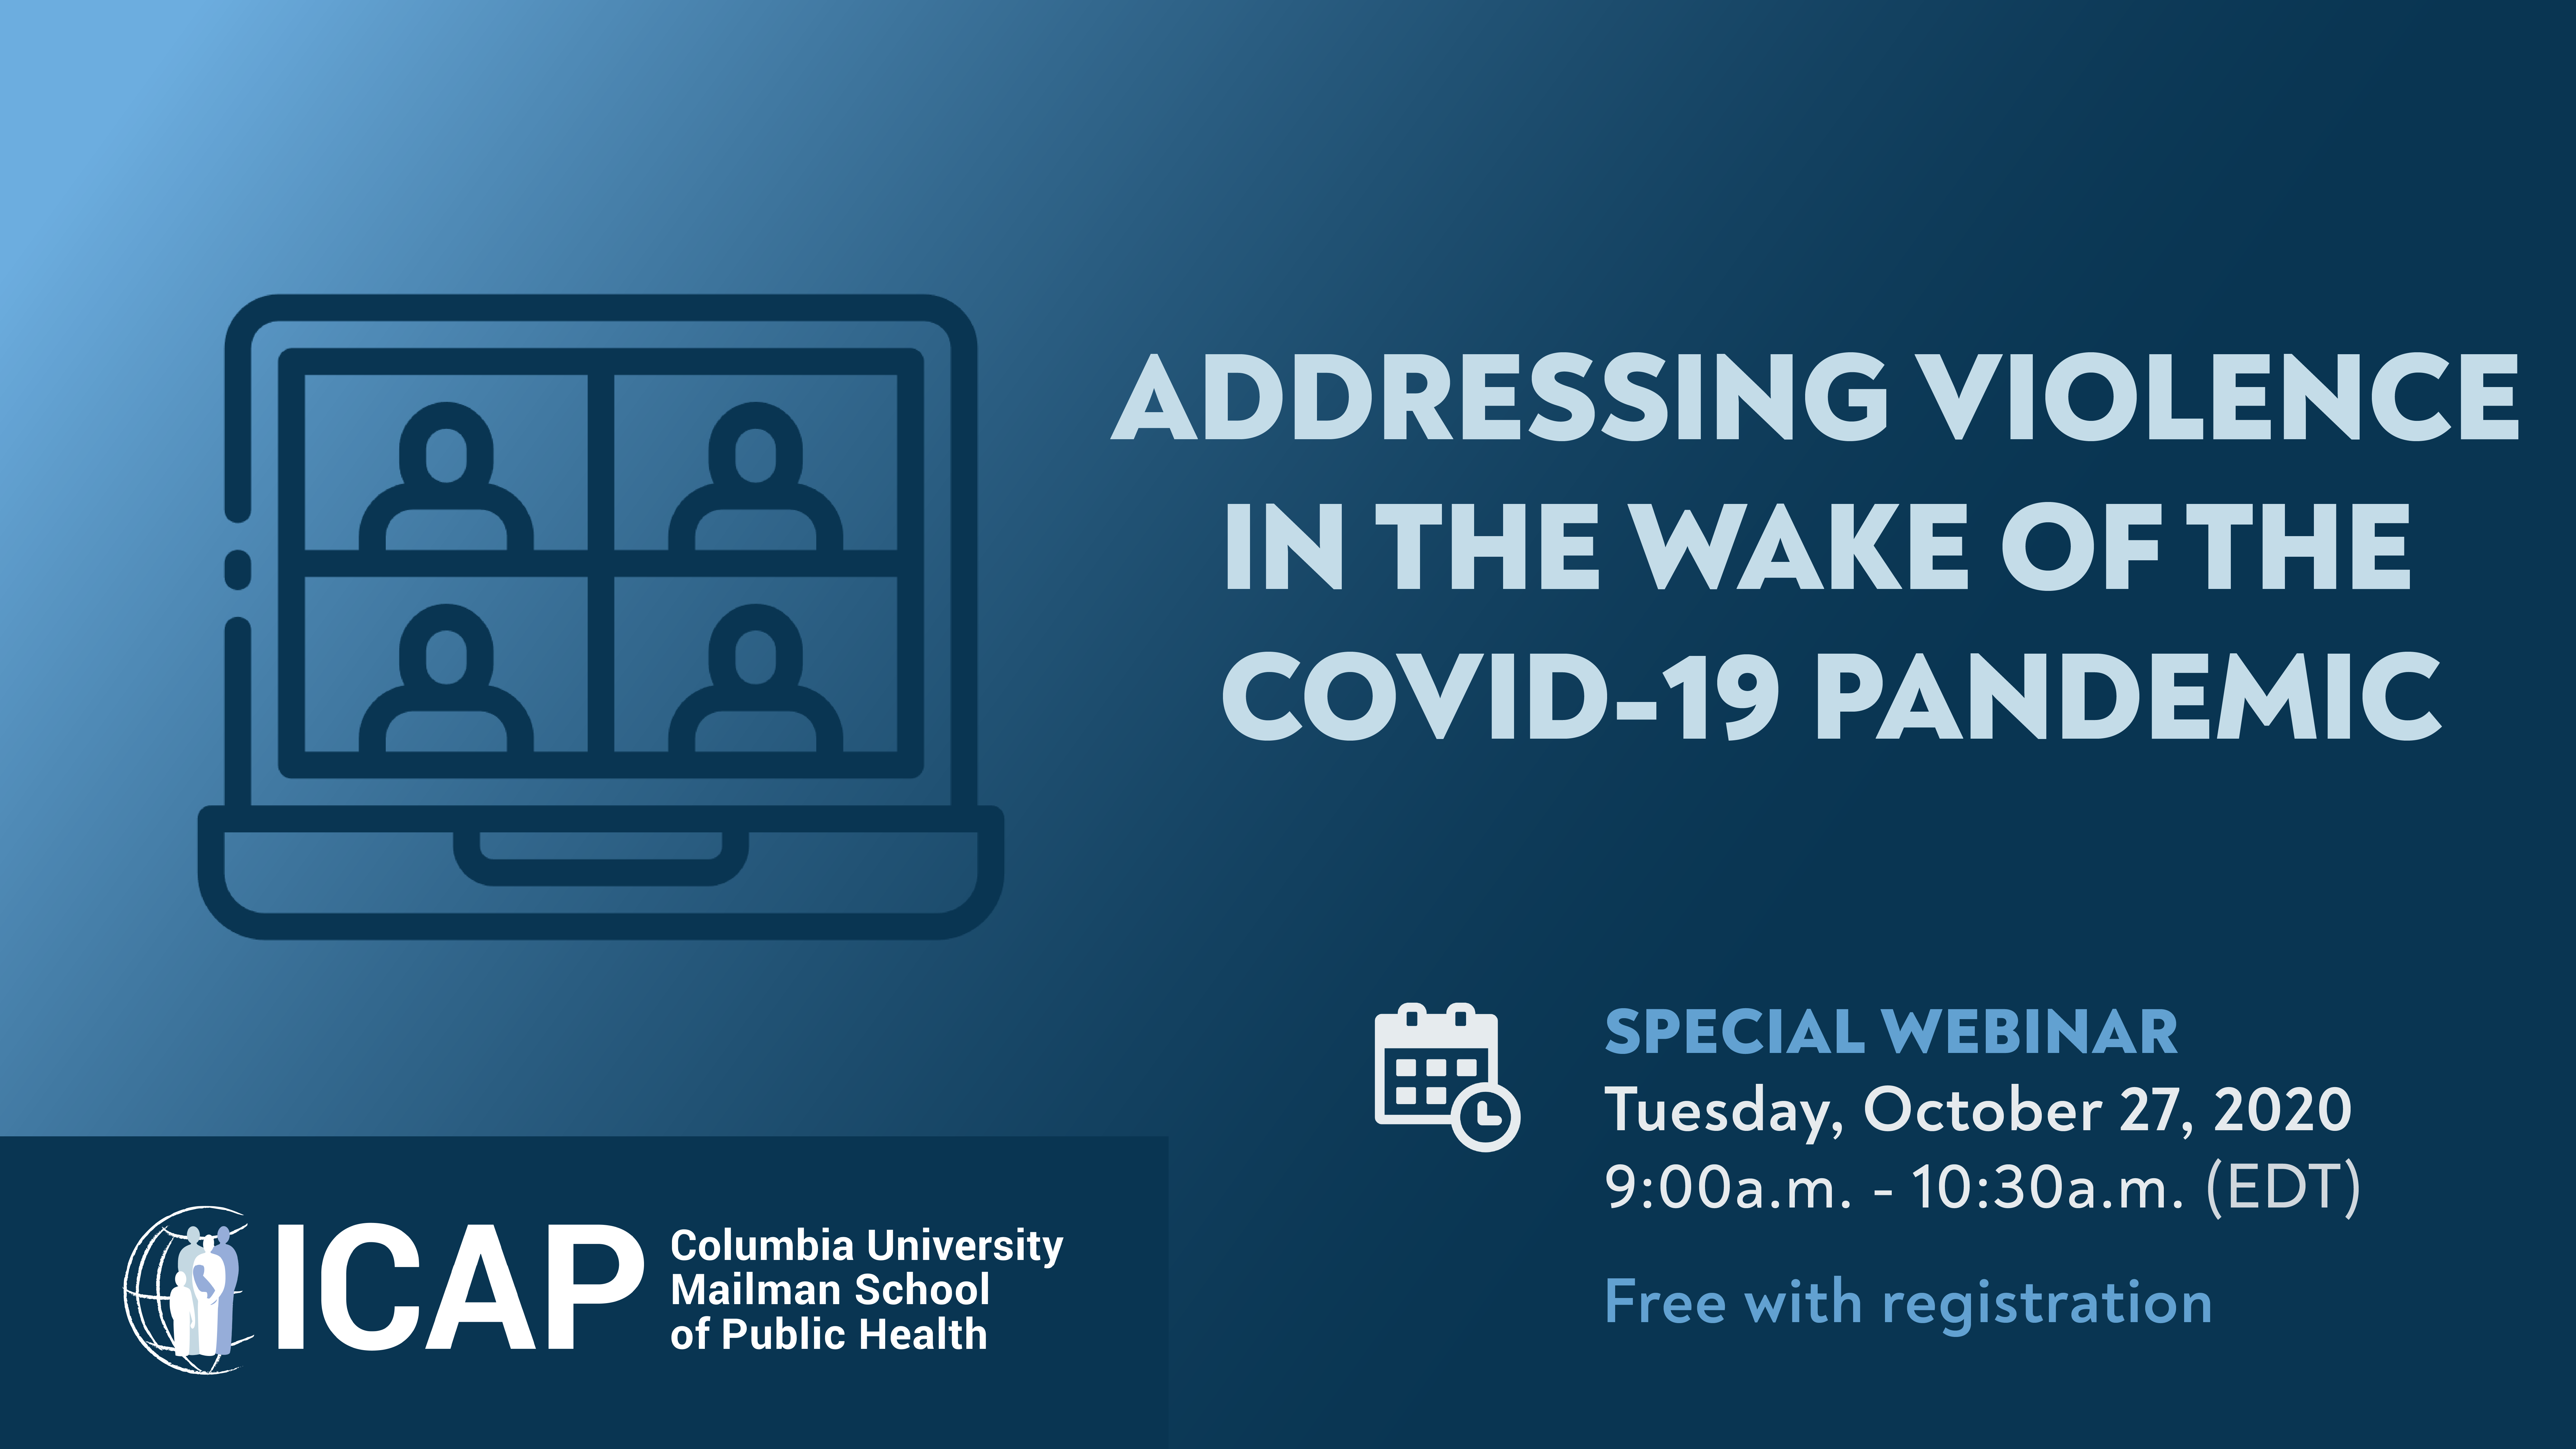 Addressing Violence in the Wake of the COVID-19 Pandemic